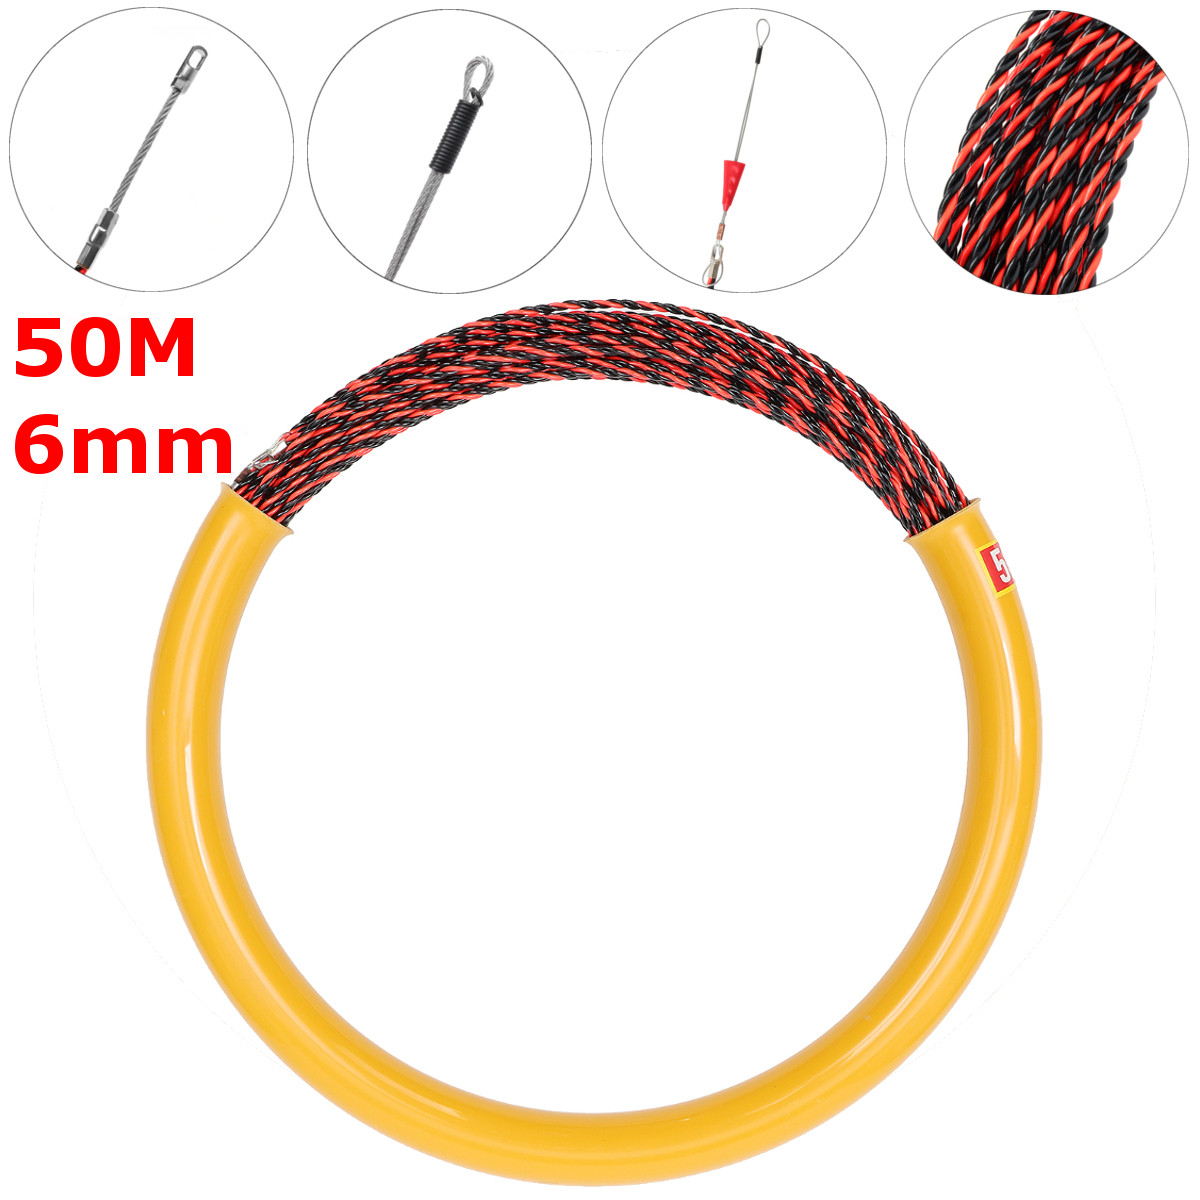 50M-6mm-Spiral-Cable-Push-Puller-Fish-Tape-Reel-Conduit-Ducting-Rodder-Pulling-Puller-1323184-2